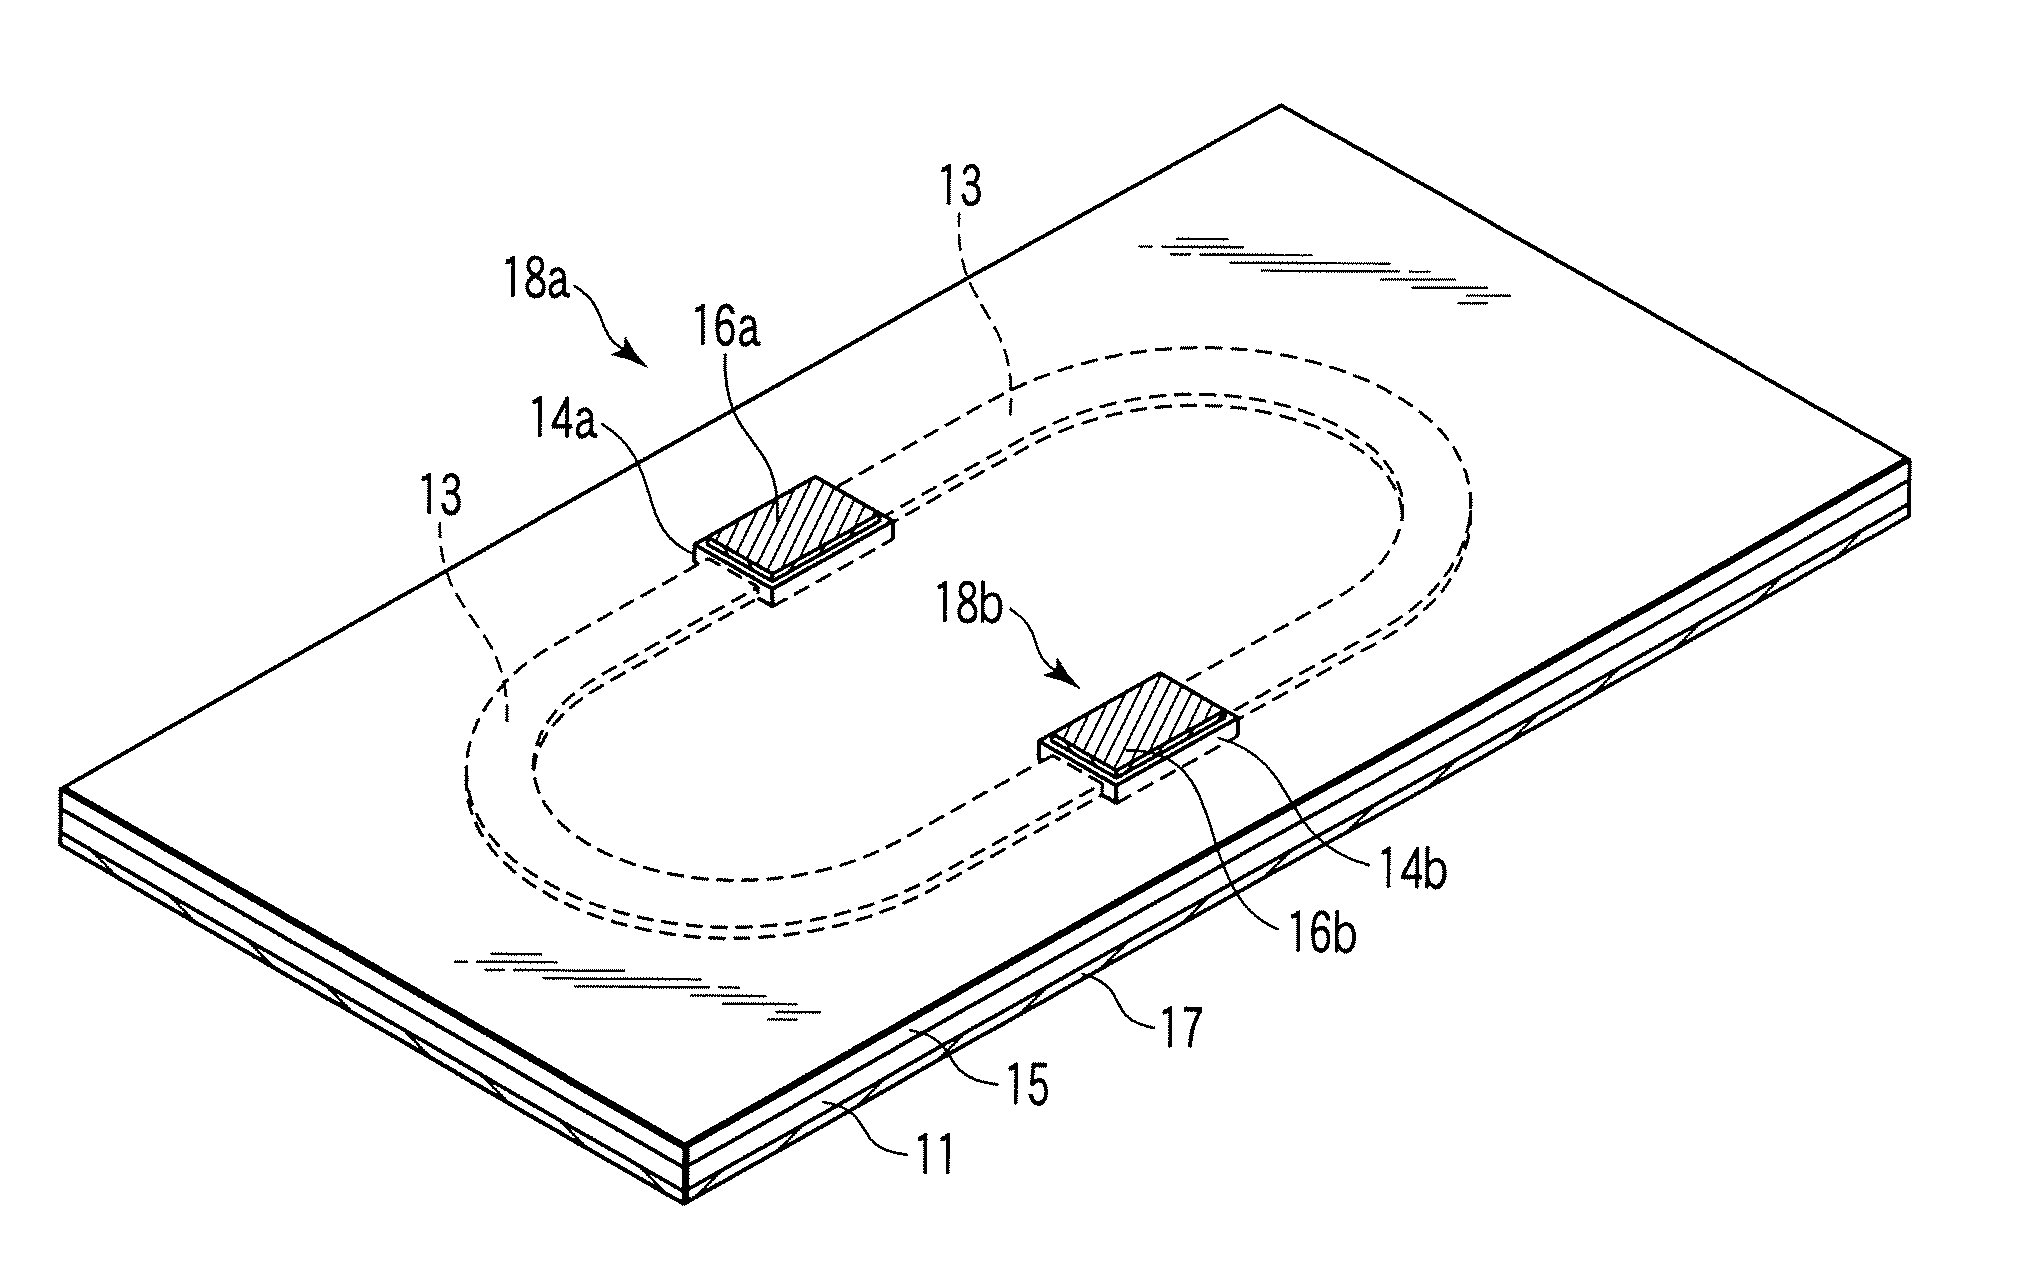 Laser-induced optical wiring apparatus